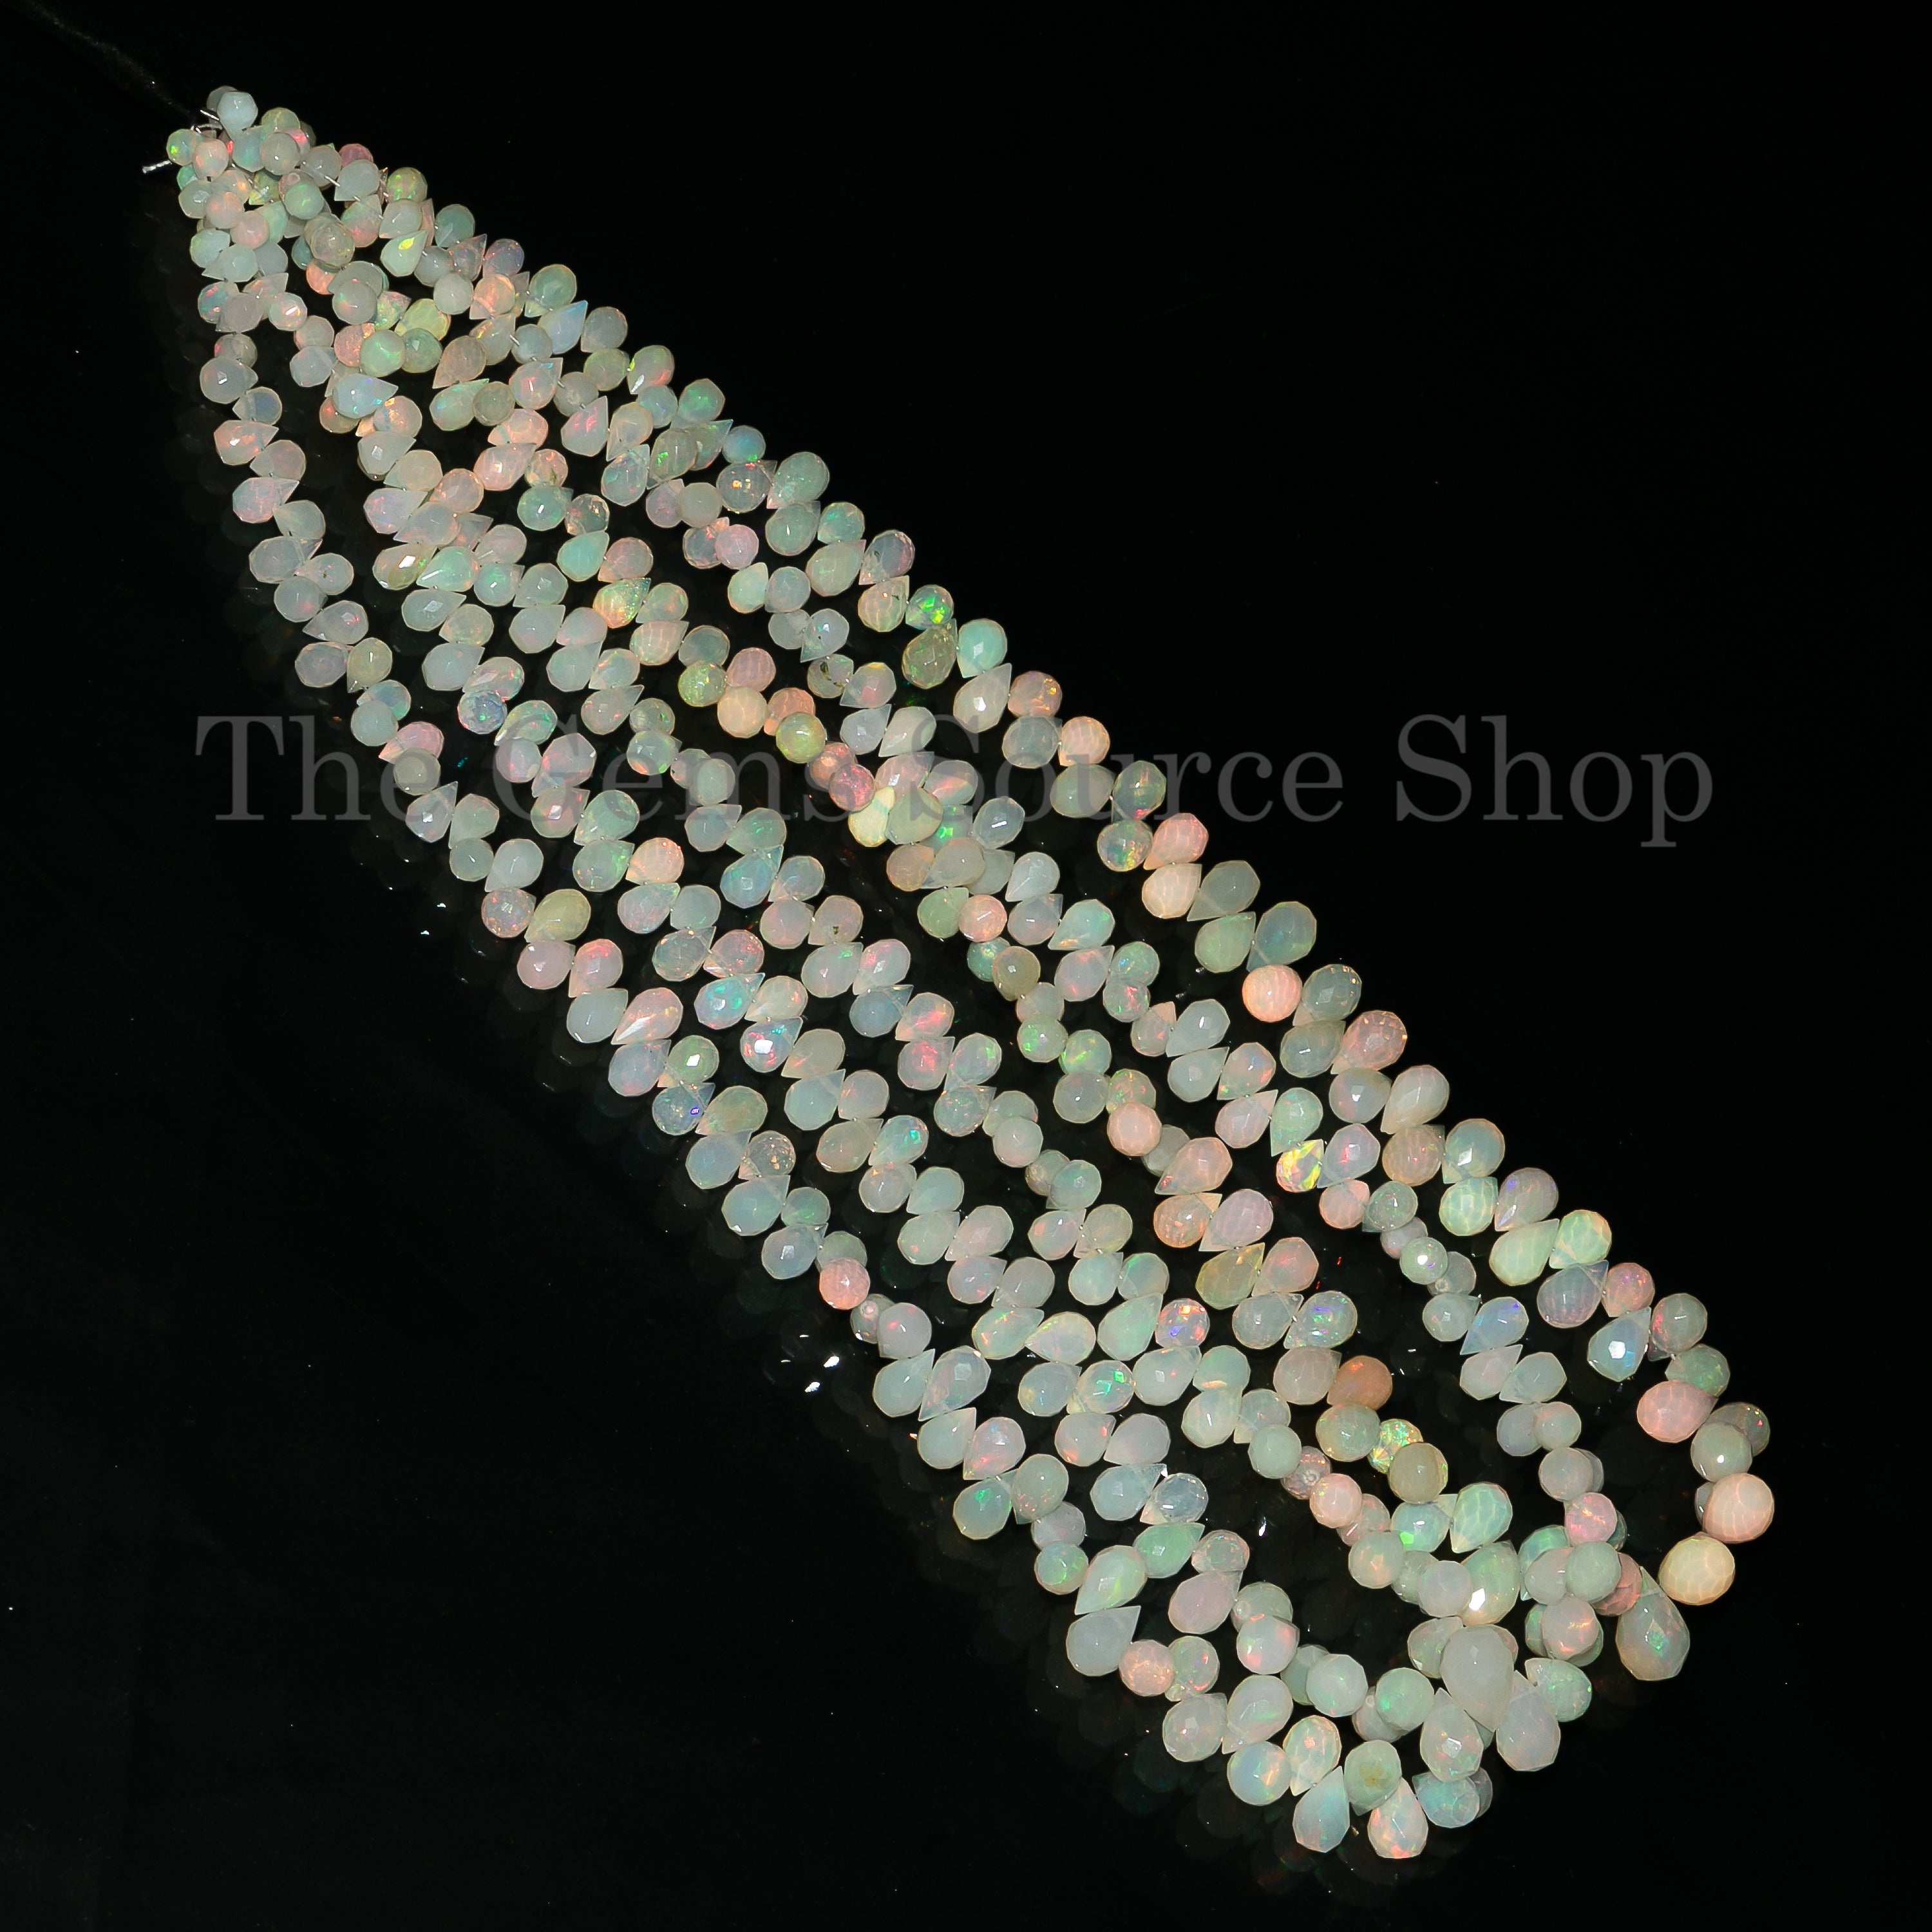 Natural Welo Fire opal Faceted Drop Shape Gemstone Beads TGS-4705